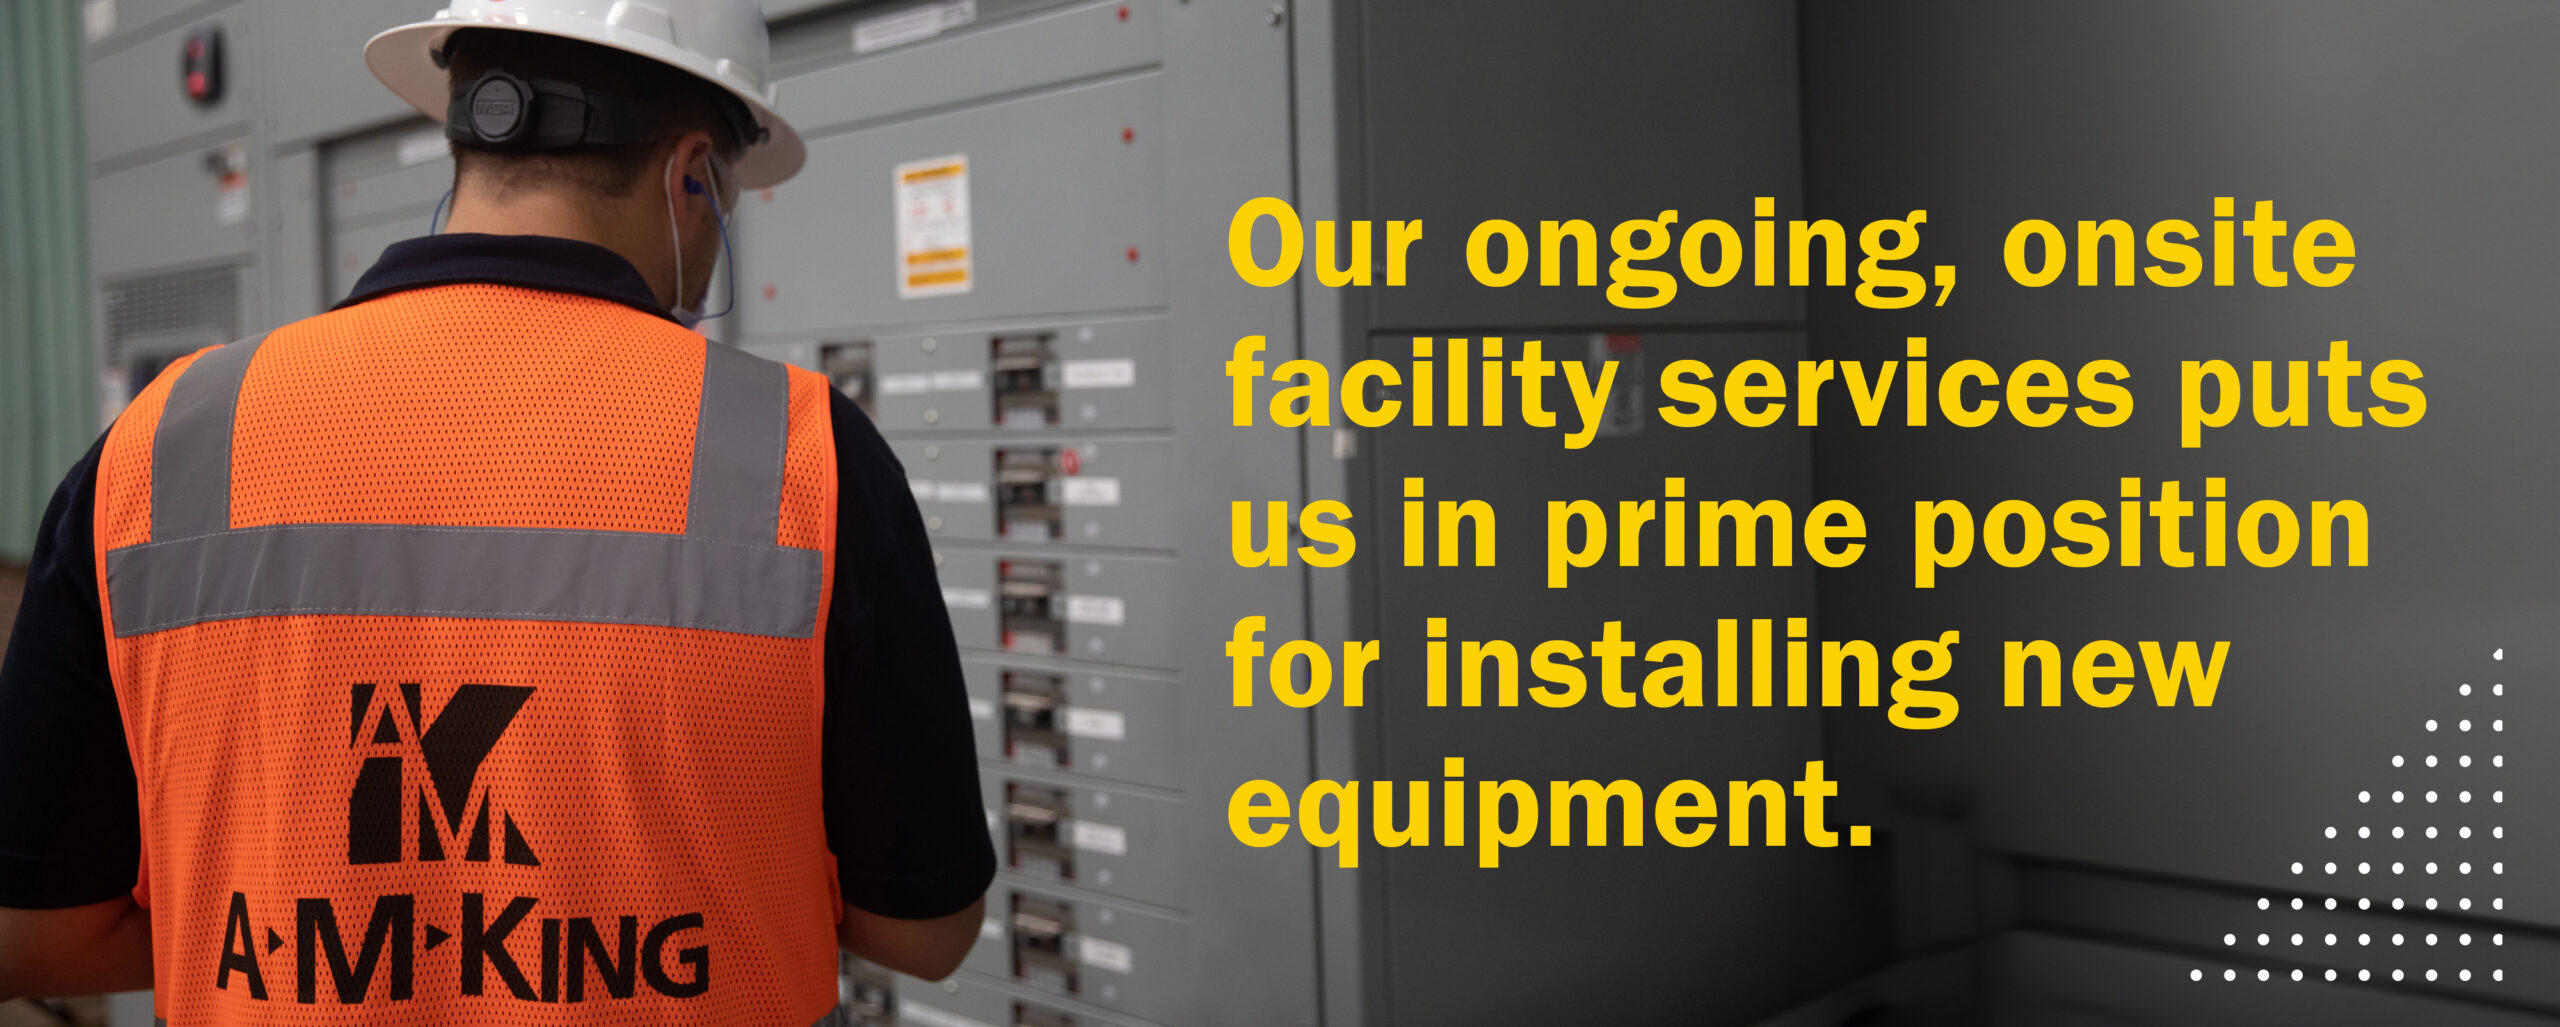 An A M King expert wearing an orange vest, performing ongoing, onsite facility services.